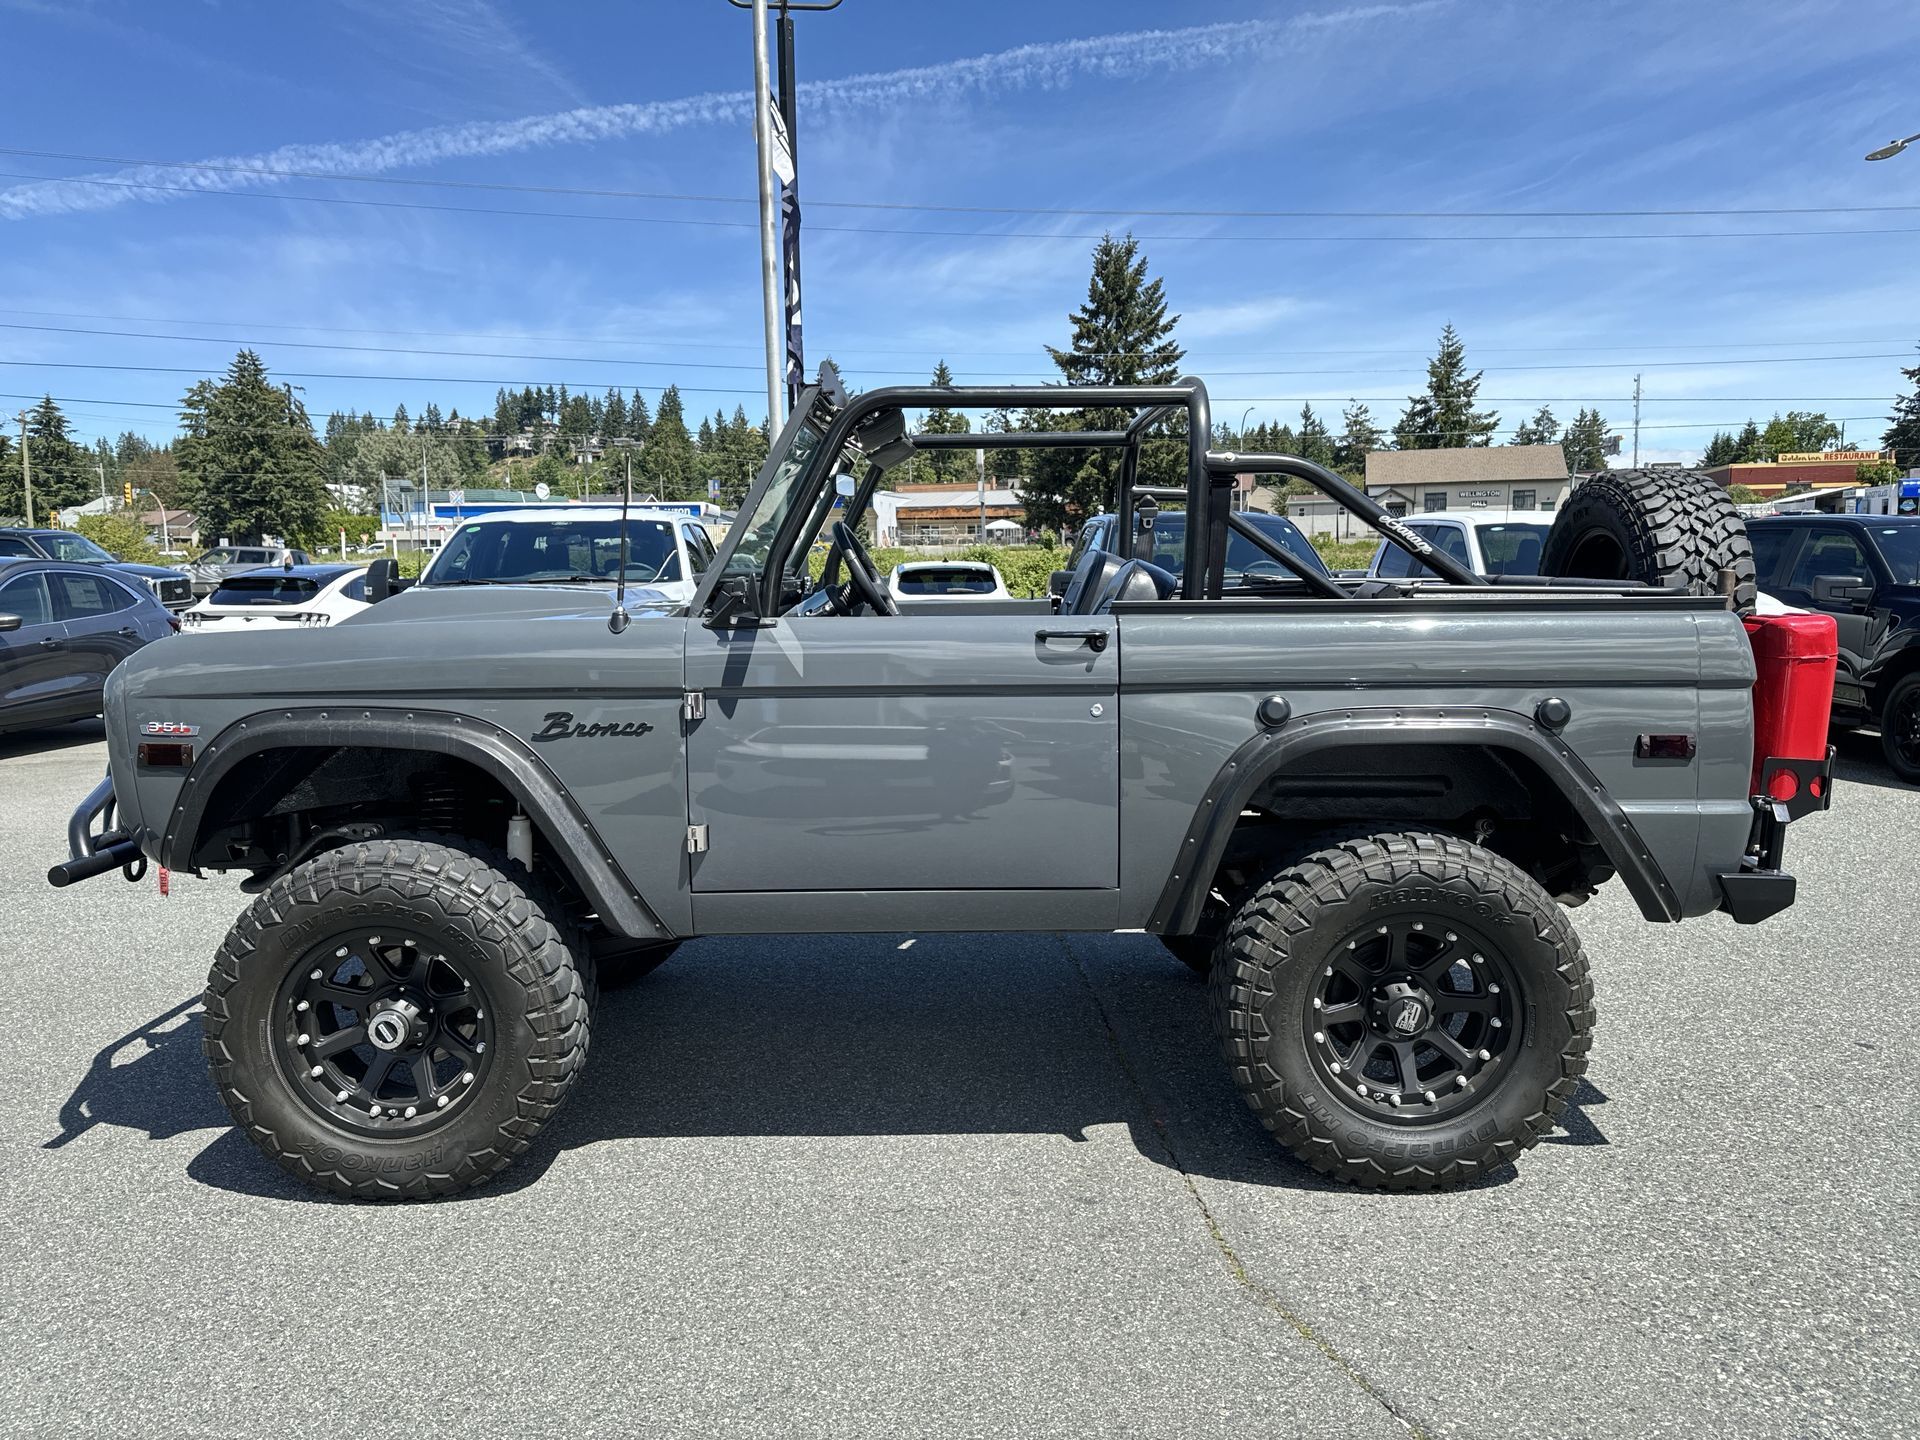 1971 Ford Bronco ZF 5 Speed Transmission, Custom Roll Cage